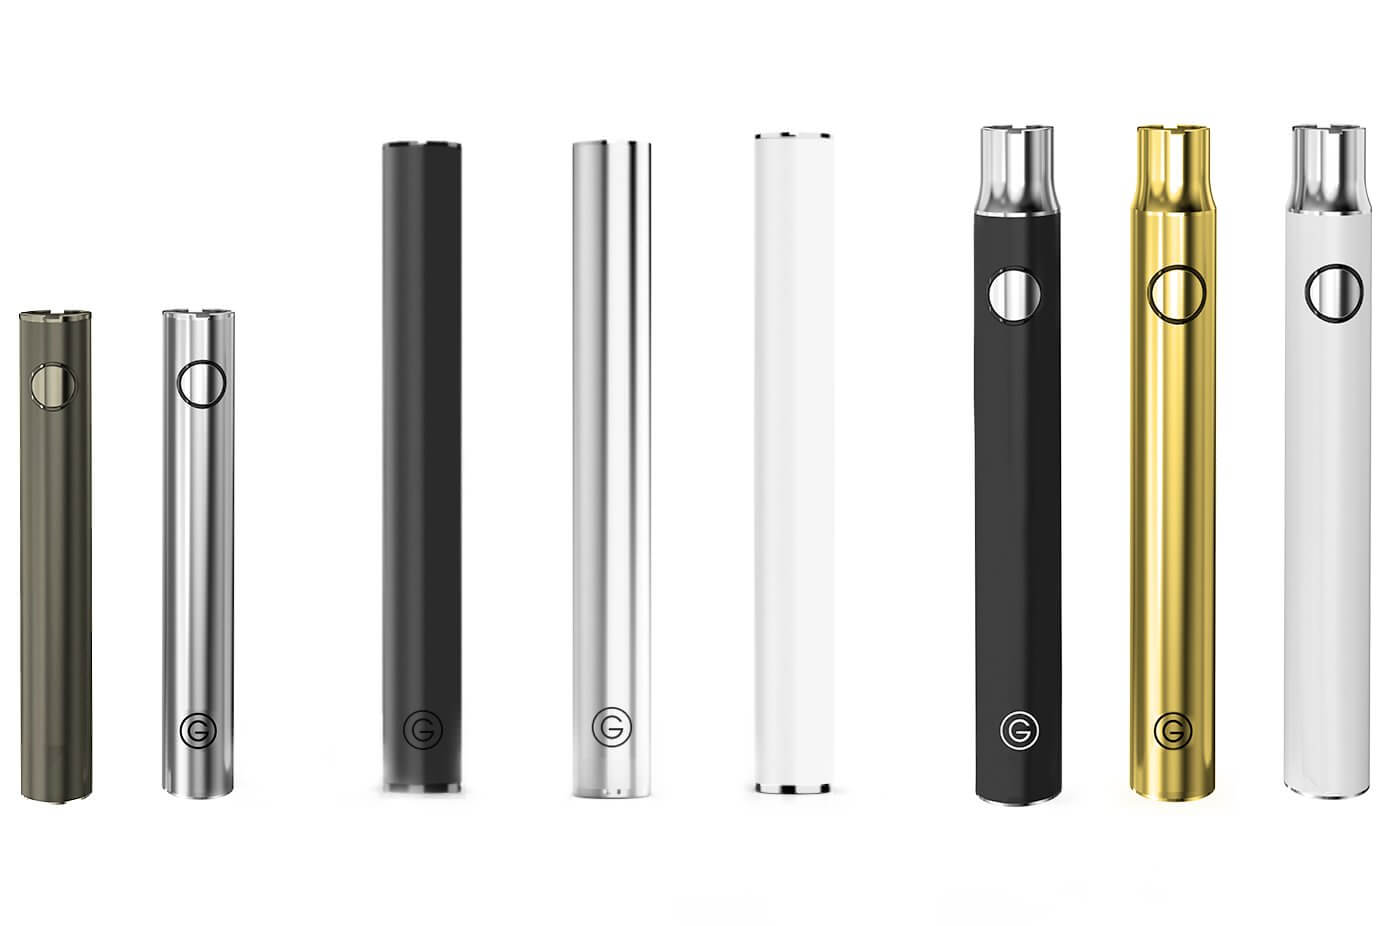 fritid mental Forbløffe What Is The Best Battery For Vape Pens? How To Choose The Right Battery